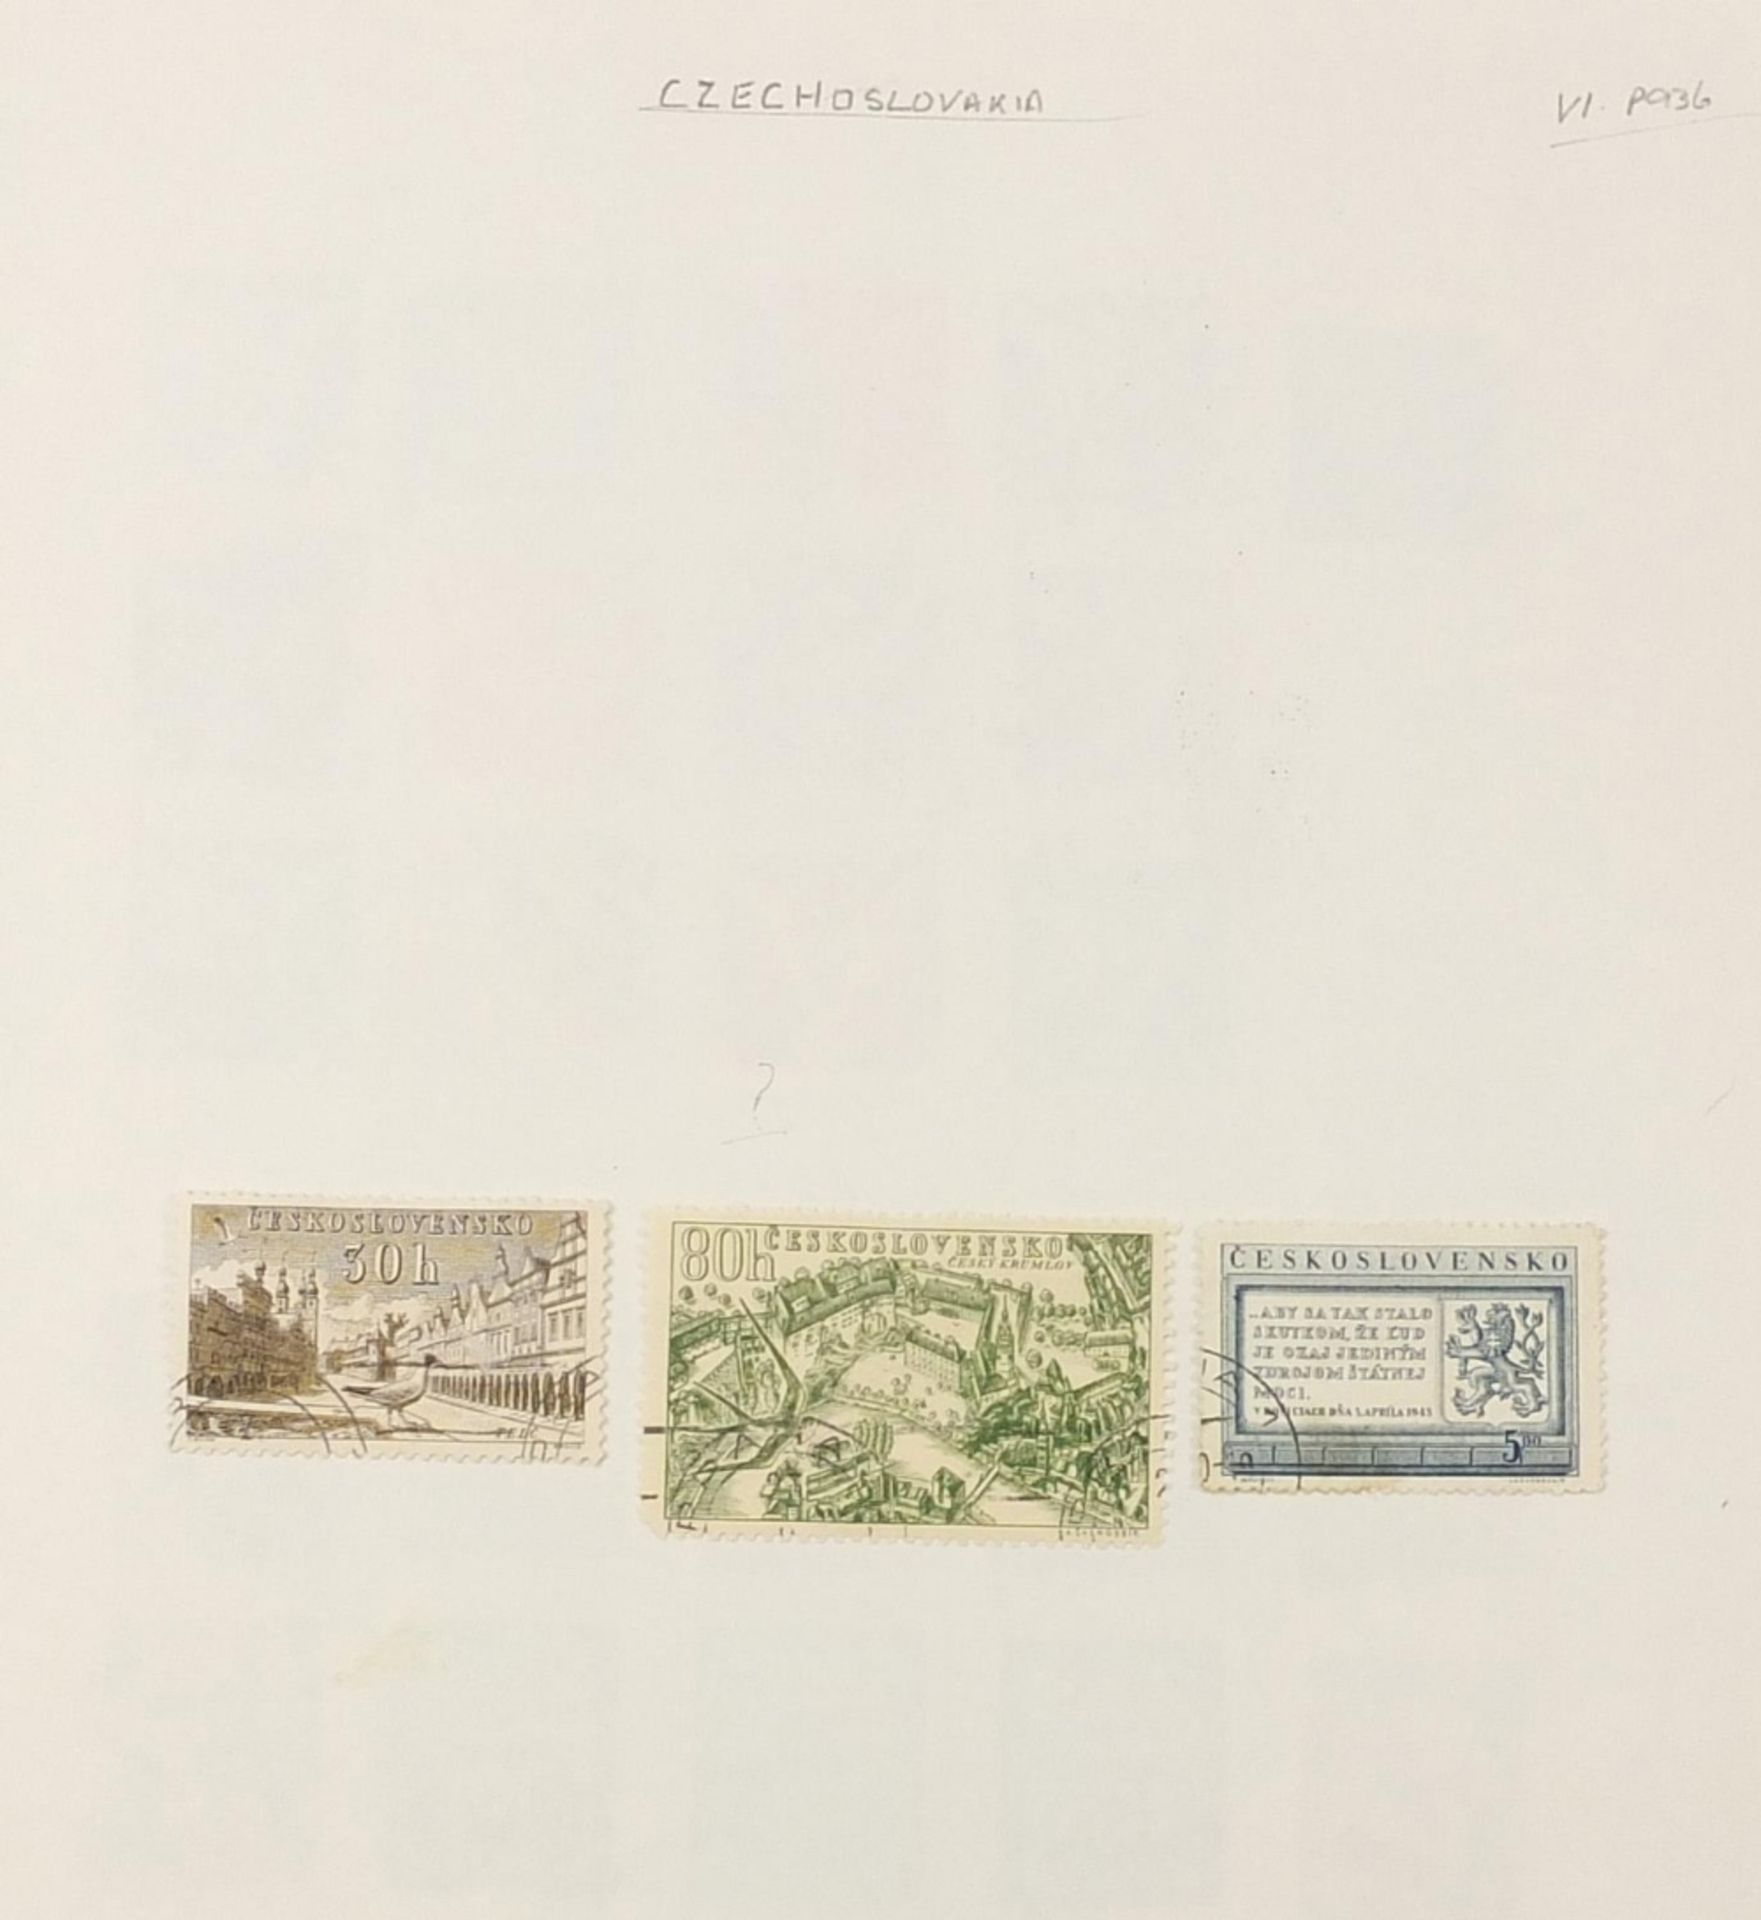 Extensive collection of antique and later world stamps arranged in albums including Brazil, - Image 21 of 52